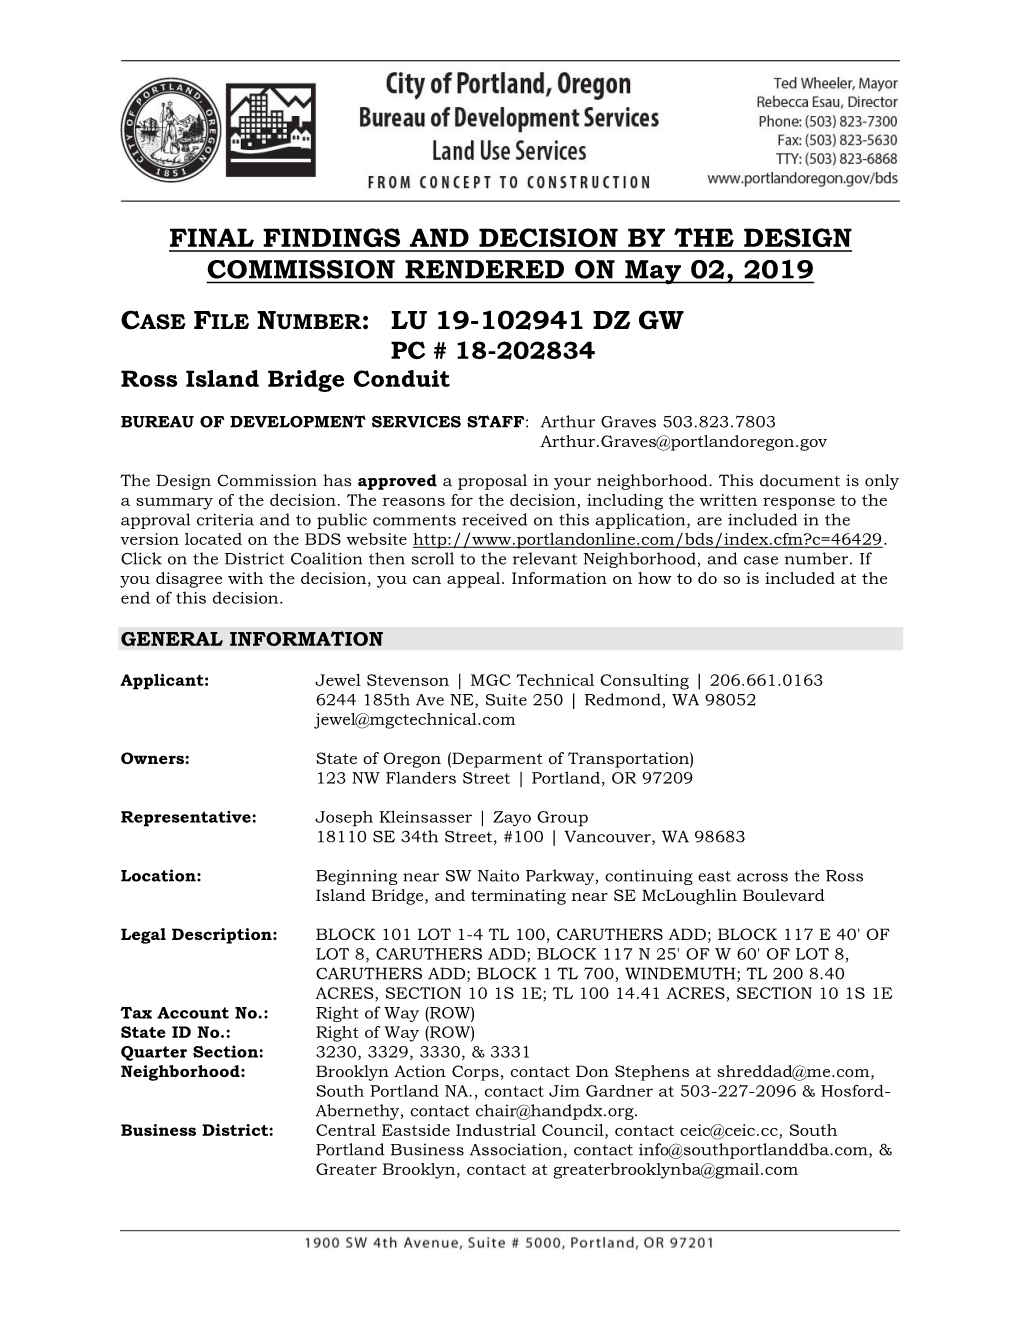 FINAL FINDINGS and DECISION by the DESIGN COMMISSION RENDERED on May 02, 2019